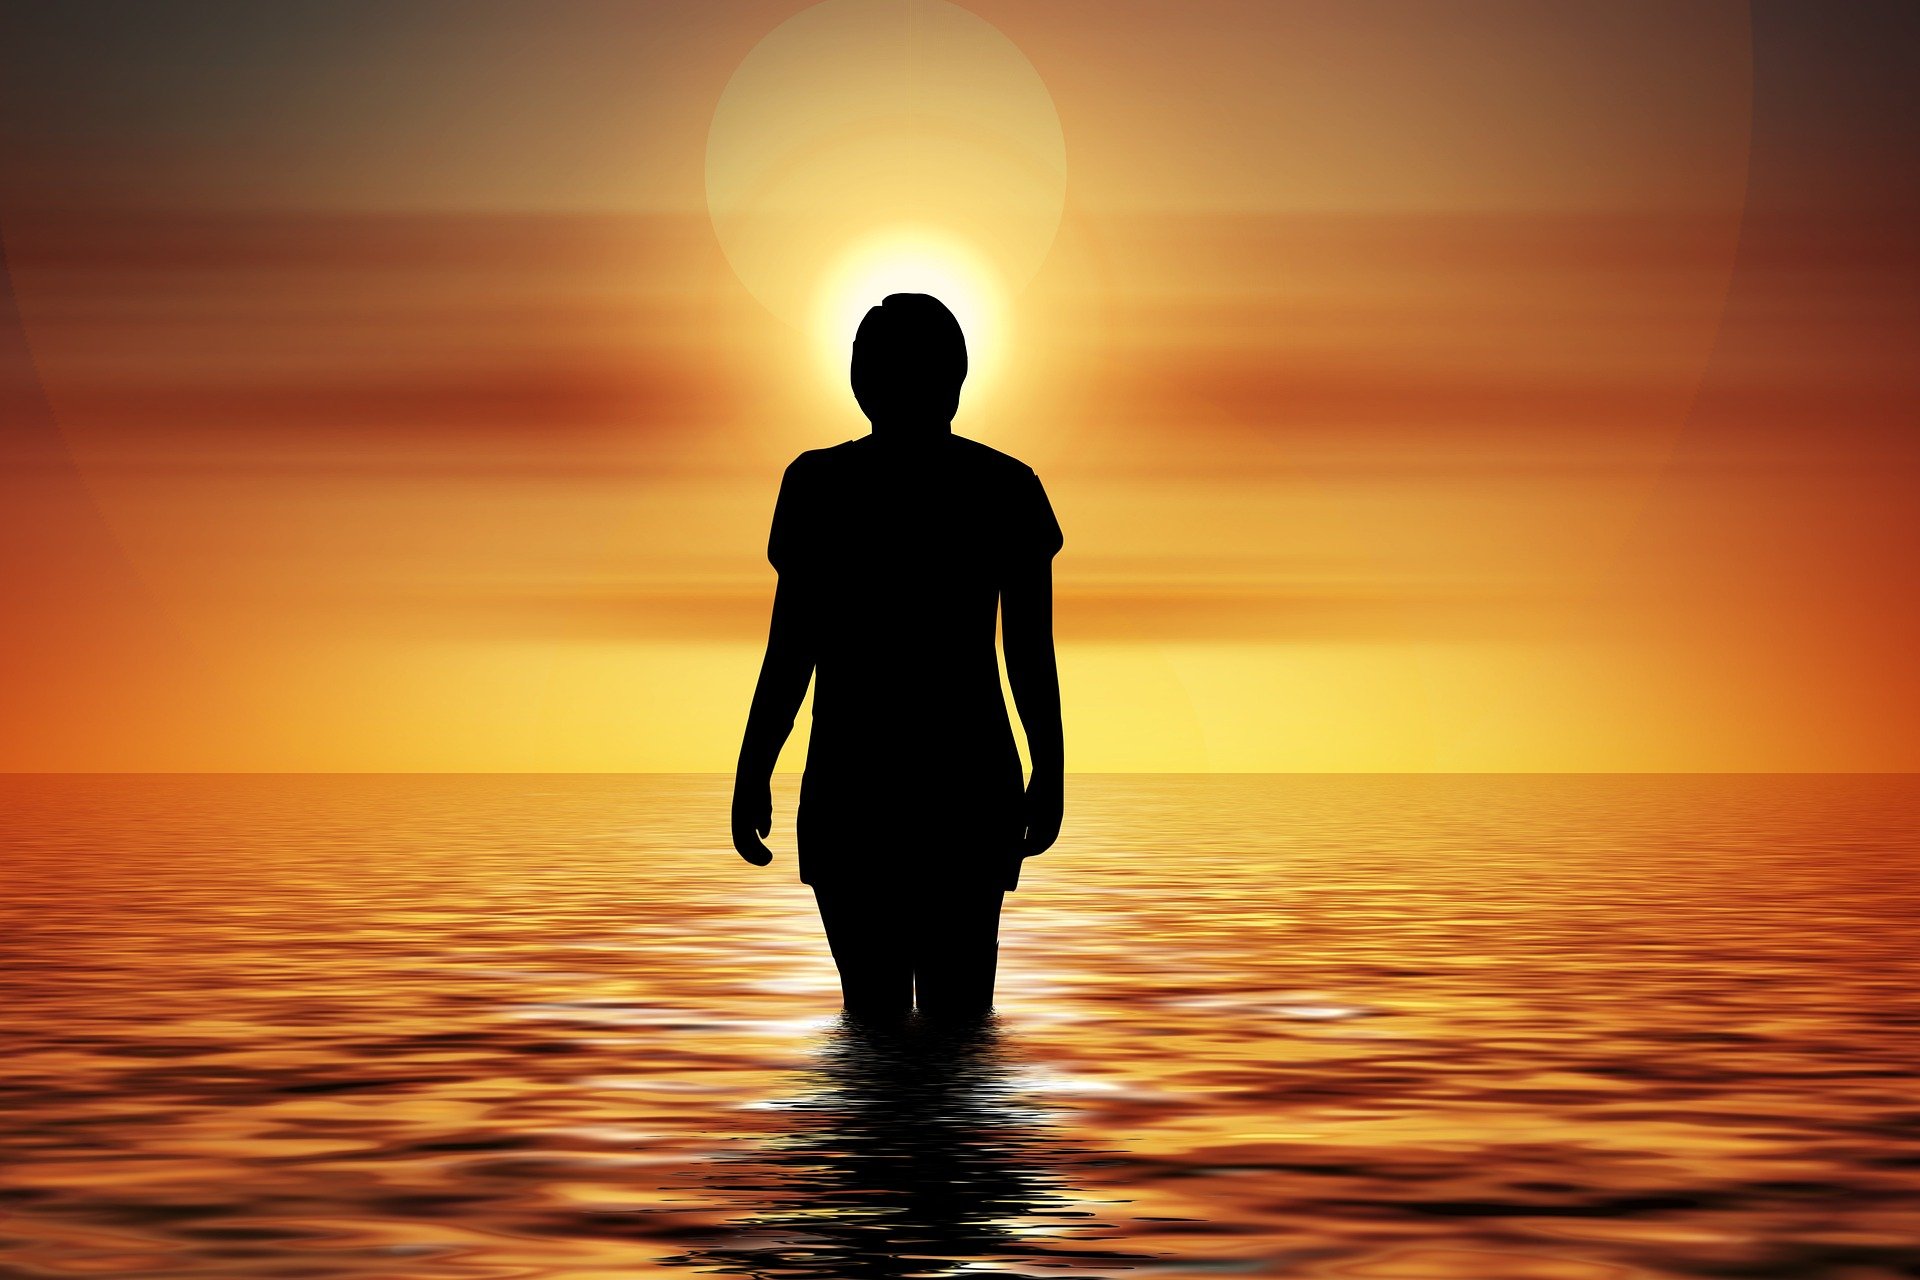 A silhouette of a solitary individual walking toward the sun. Nov. 18 marks International Survivors of Suicide Loss Day, dedicated to those who wrestle with the complex and often silent grief of having lost loved ones to suicide. (OSV News photo/Gerd Altmann, Pixabay)